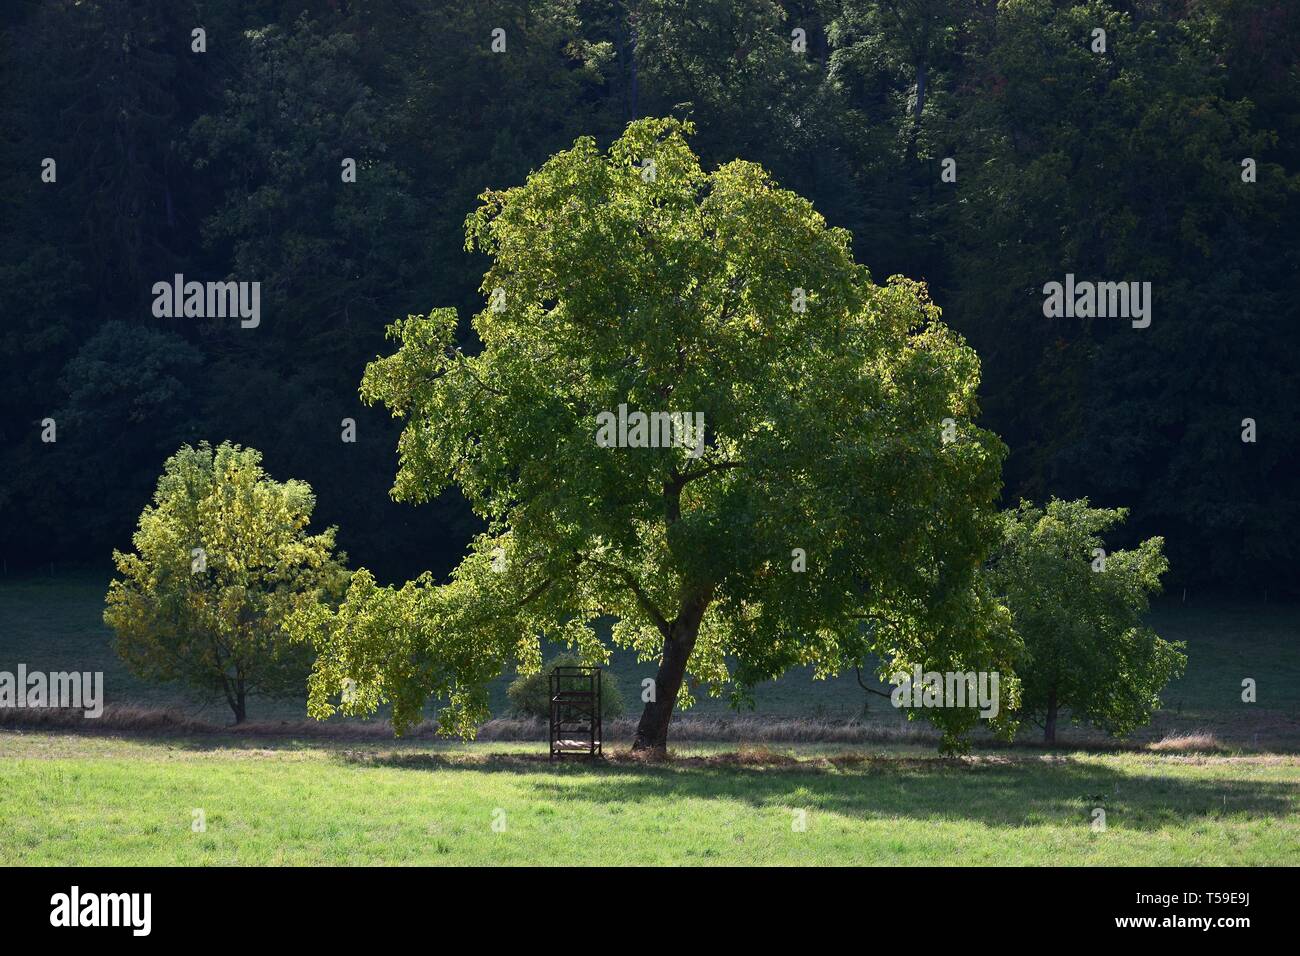 A walnut tree in front of dark forest. Two small trees in the background. Fischbachtal, Odenwald, Germany. Stock Photo